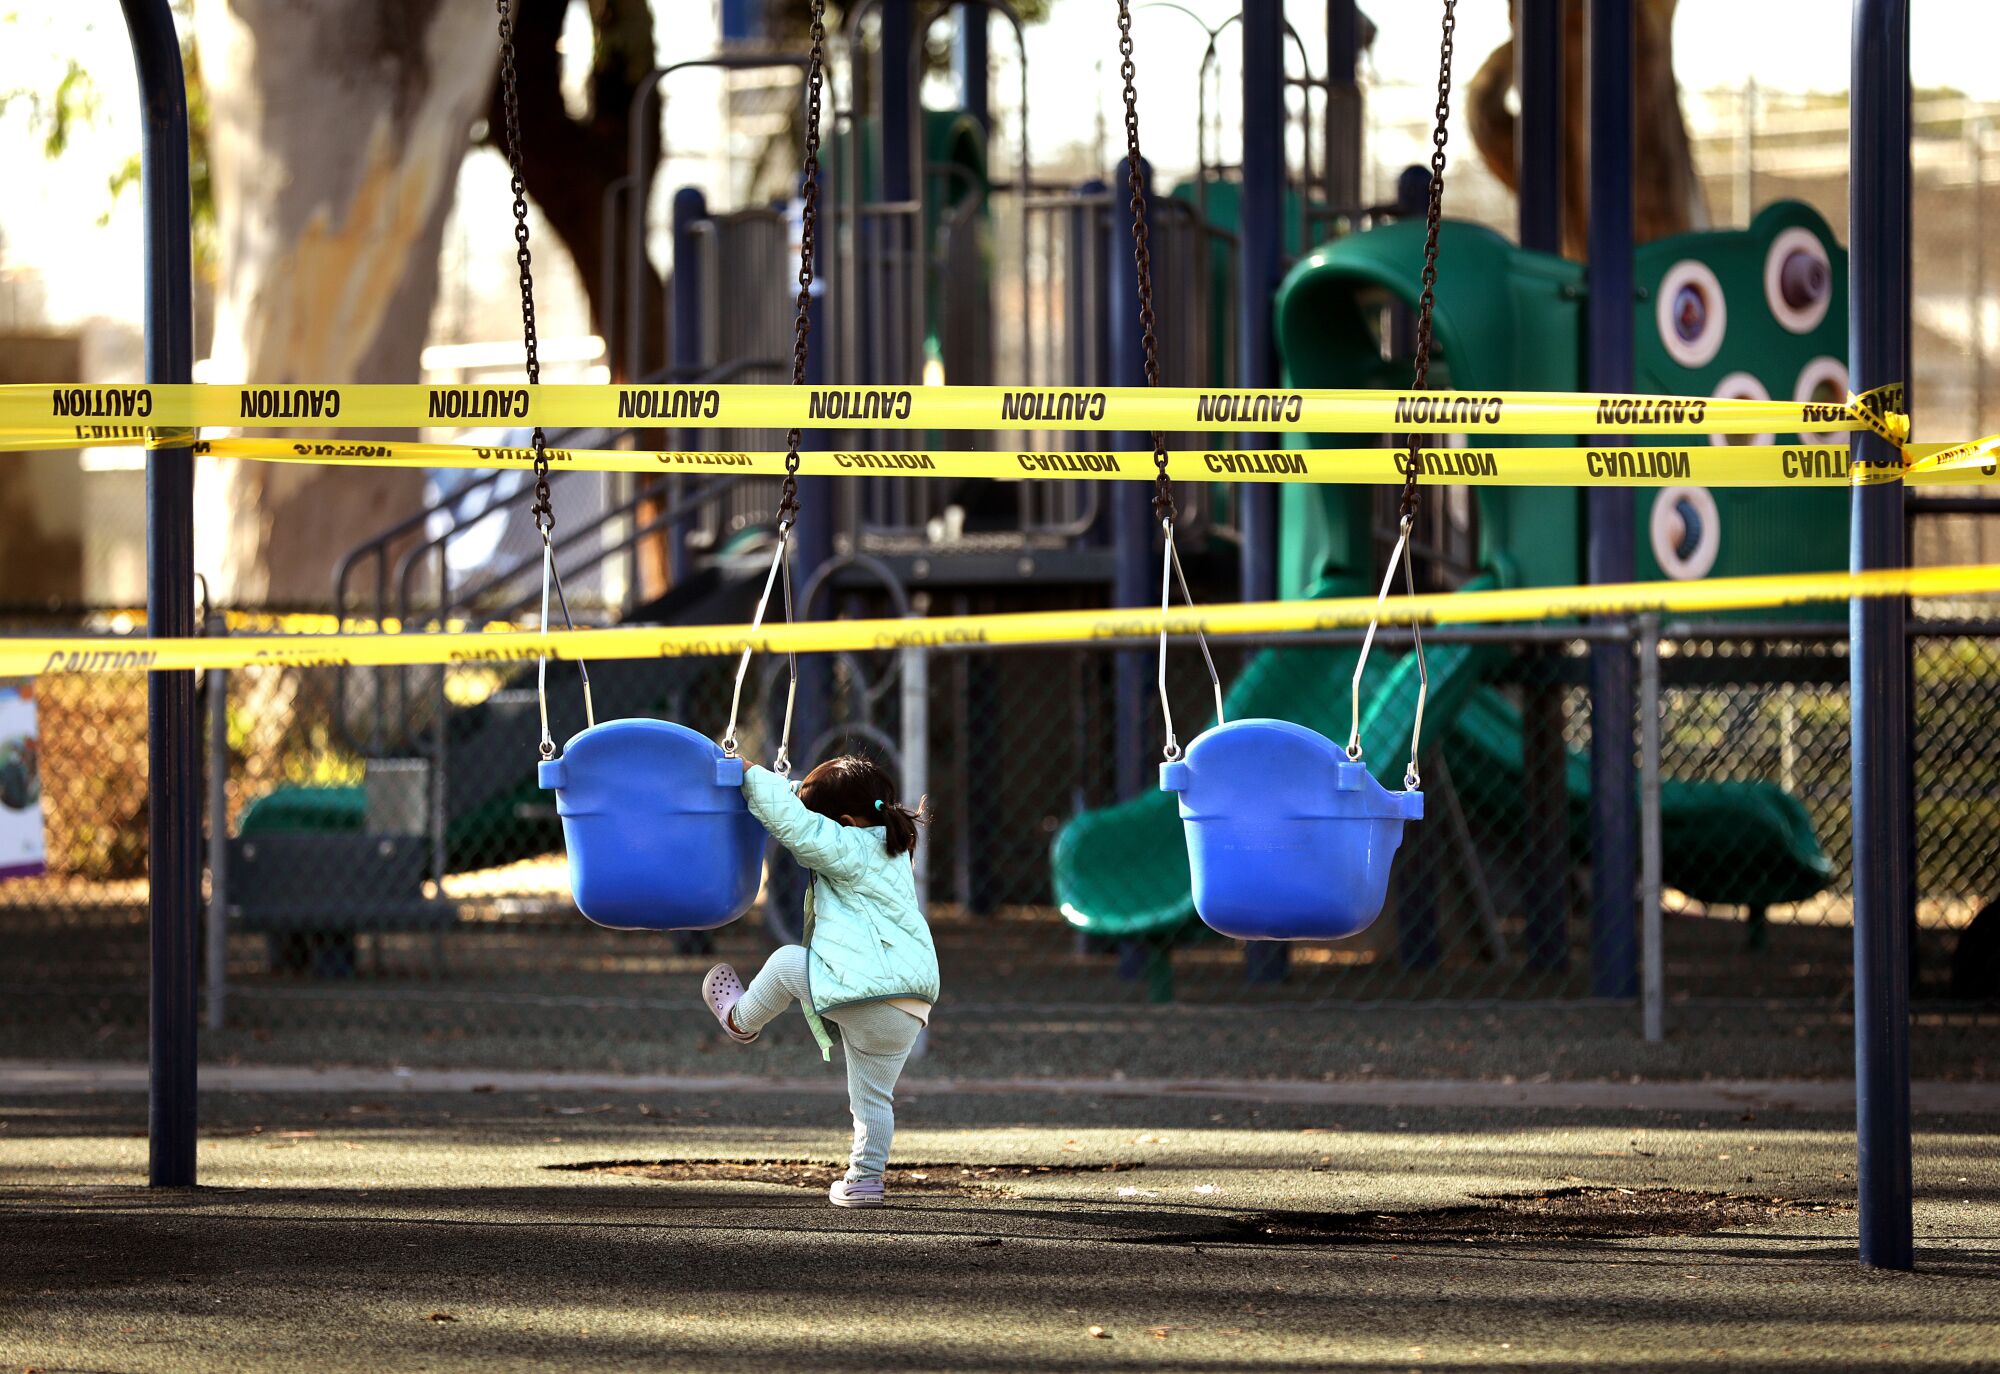 A toddler tries to climb onto a swing at a playground surrounded by yellow caution tape.